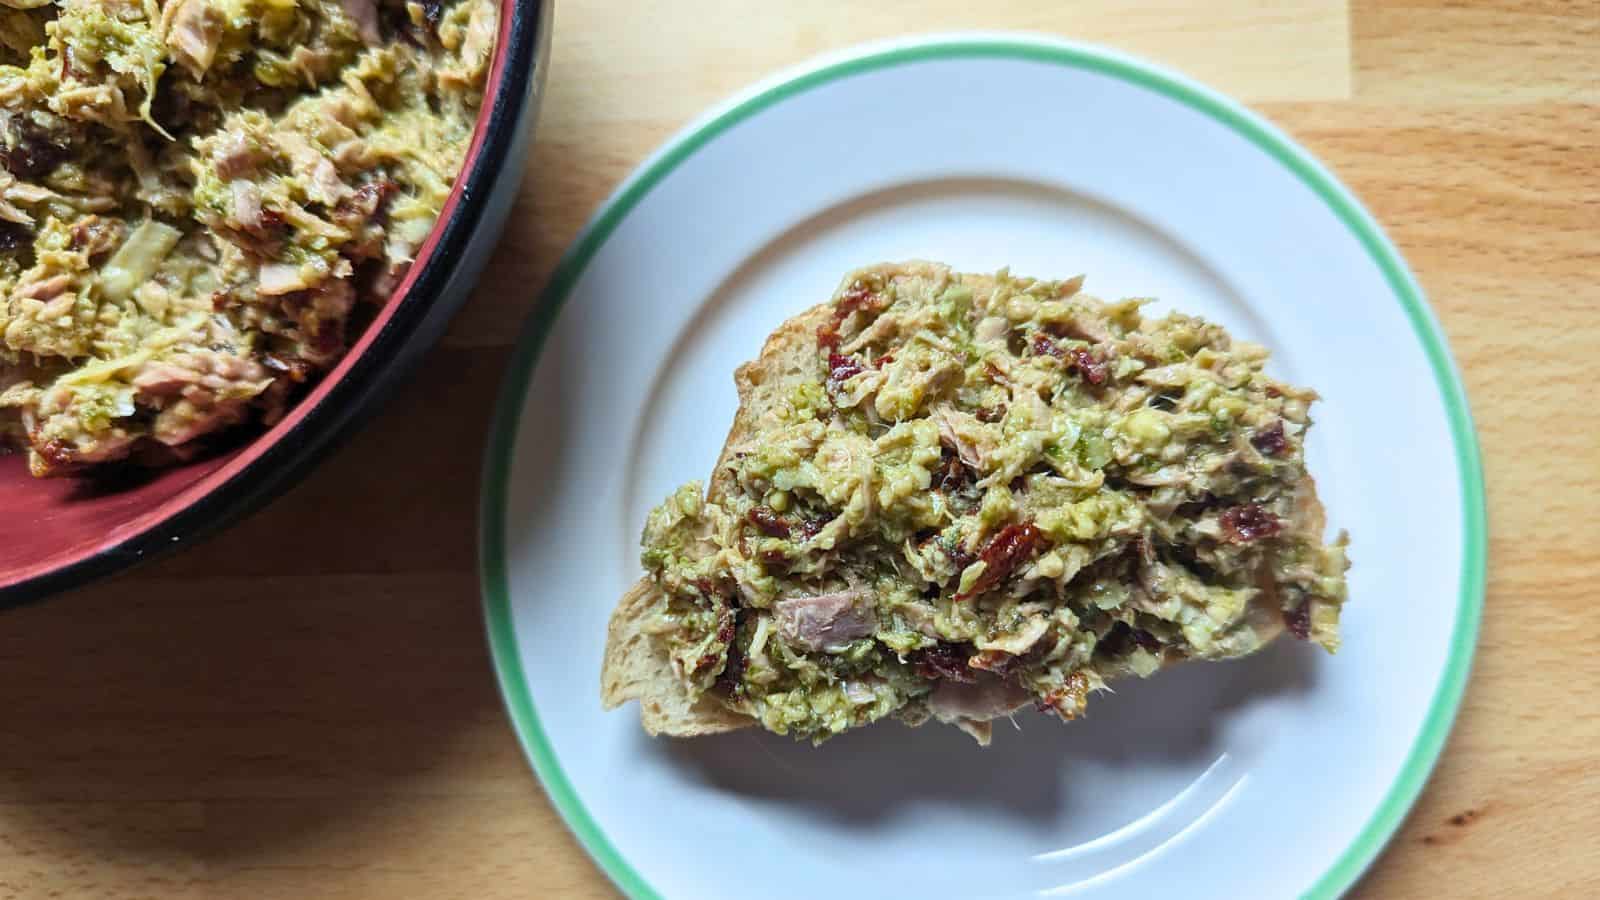 Image shows an overhead shot of an open face Pesto and Sundried Tomato Tuna Salad sandwich.